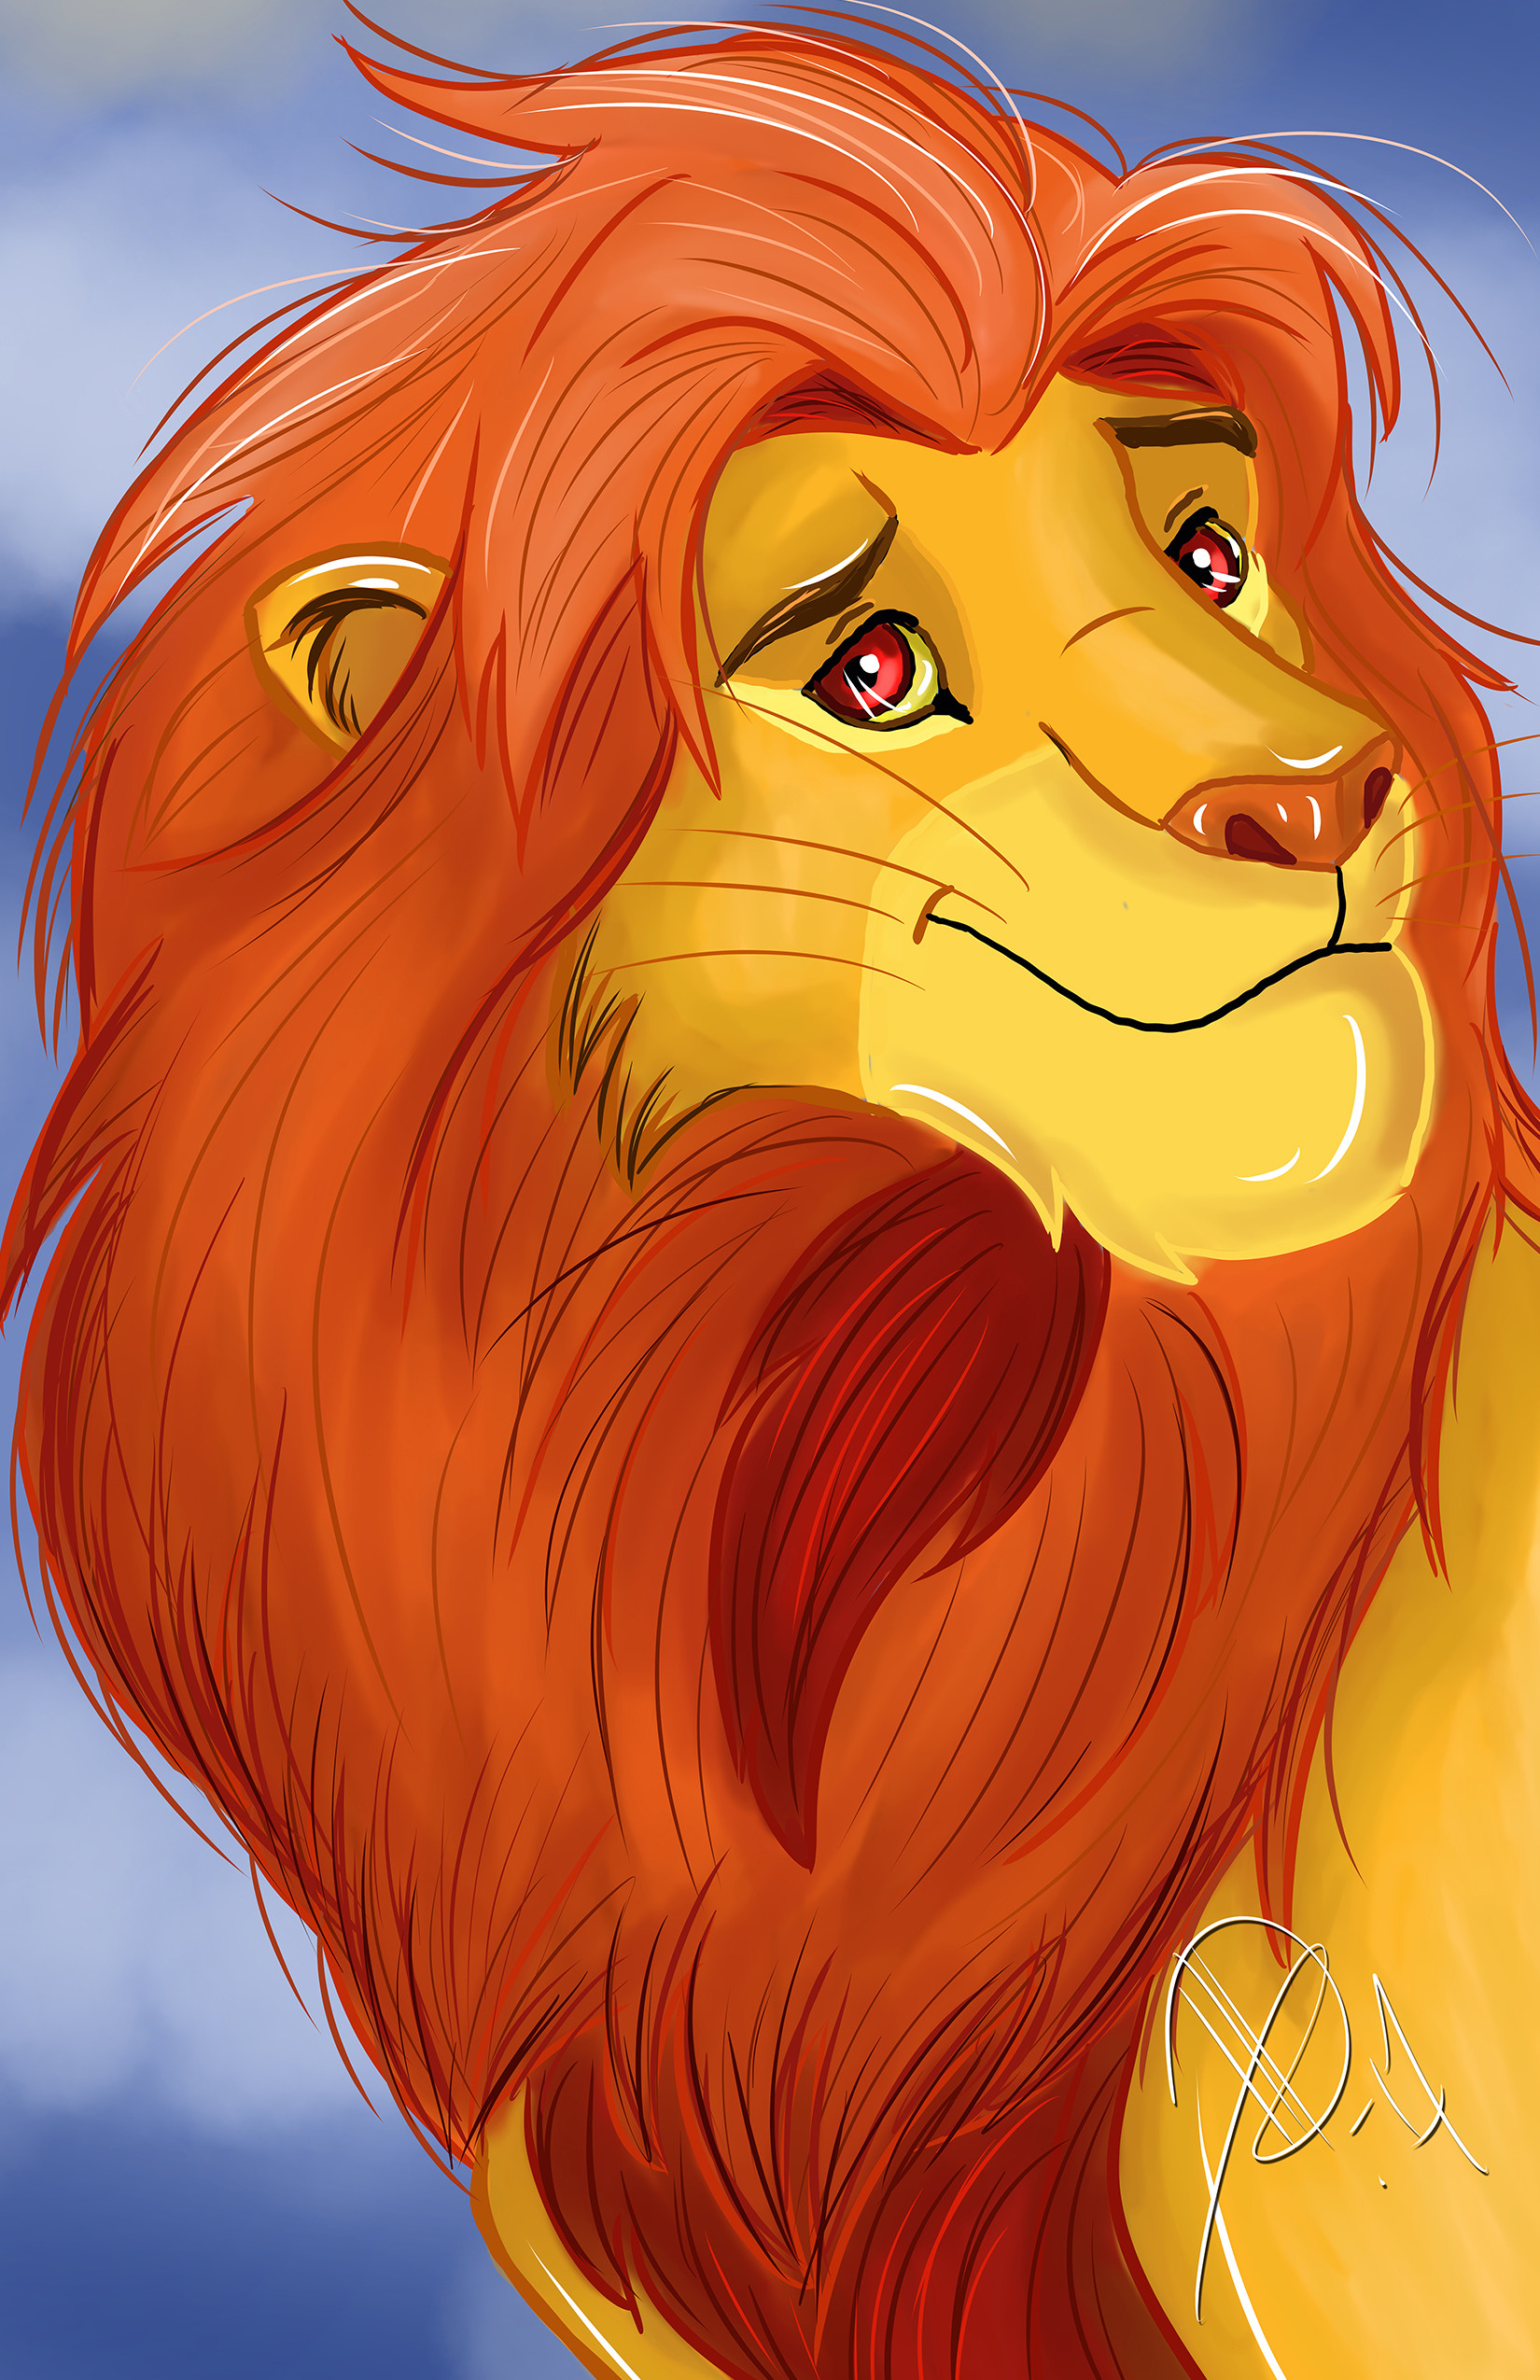 Artstation - The Lion King Commissions